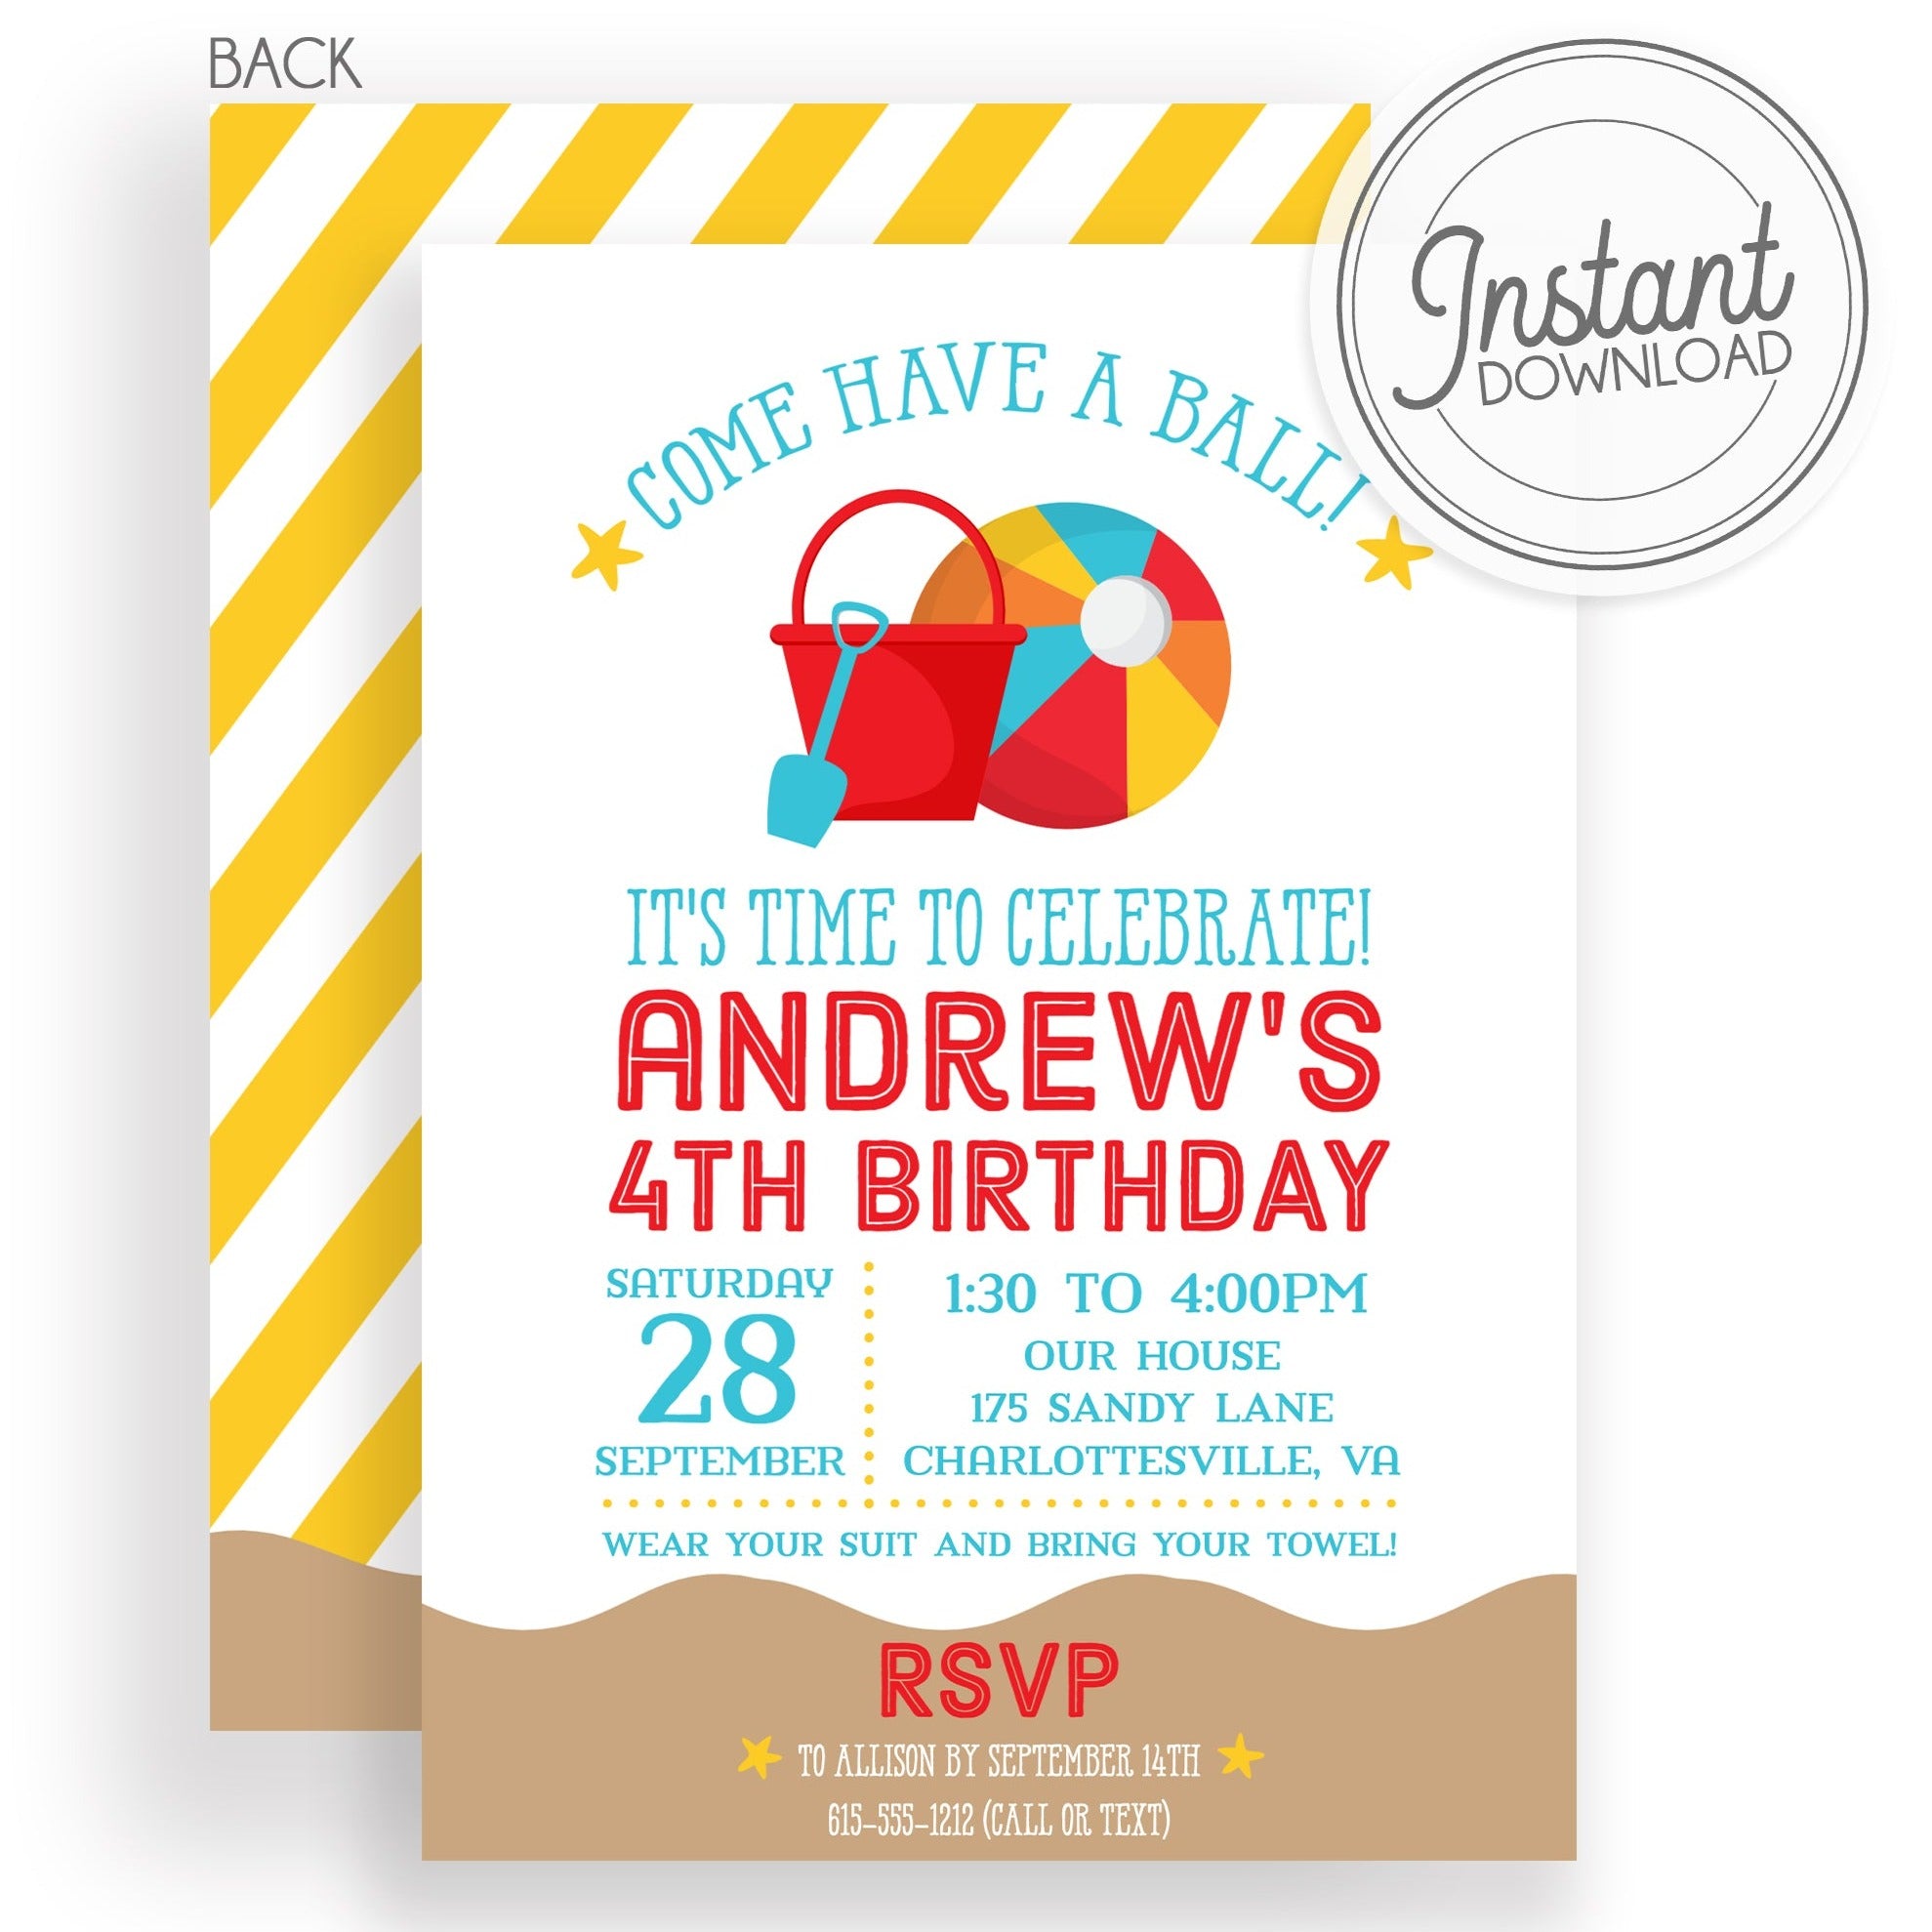 Beach Ball Birthday Invitation, DIY easy download and edit on your computer, fully change the colors and layout if needed, templett.com